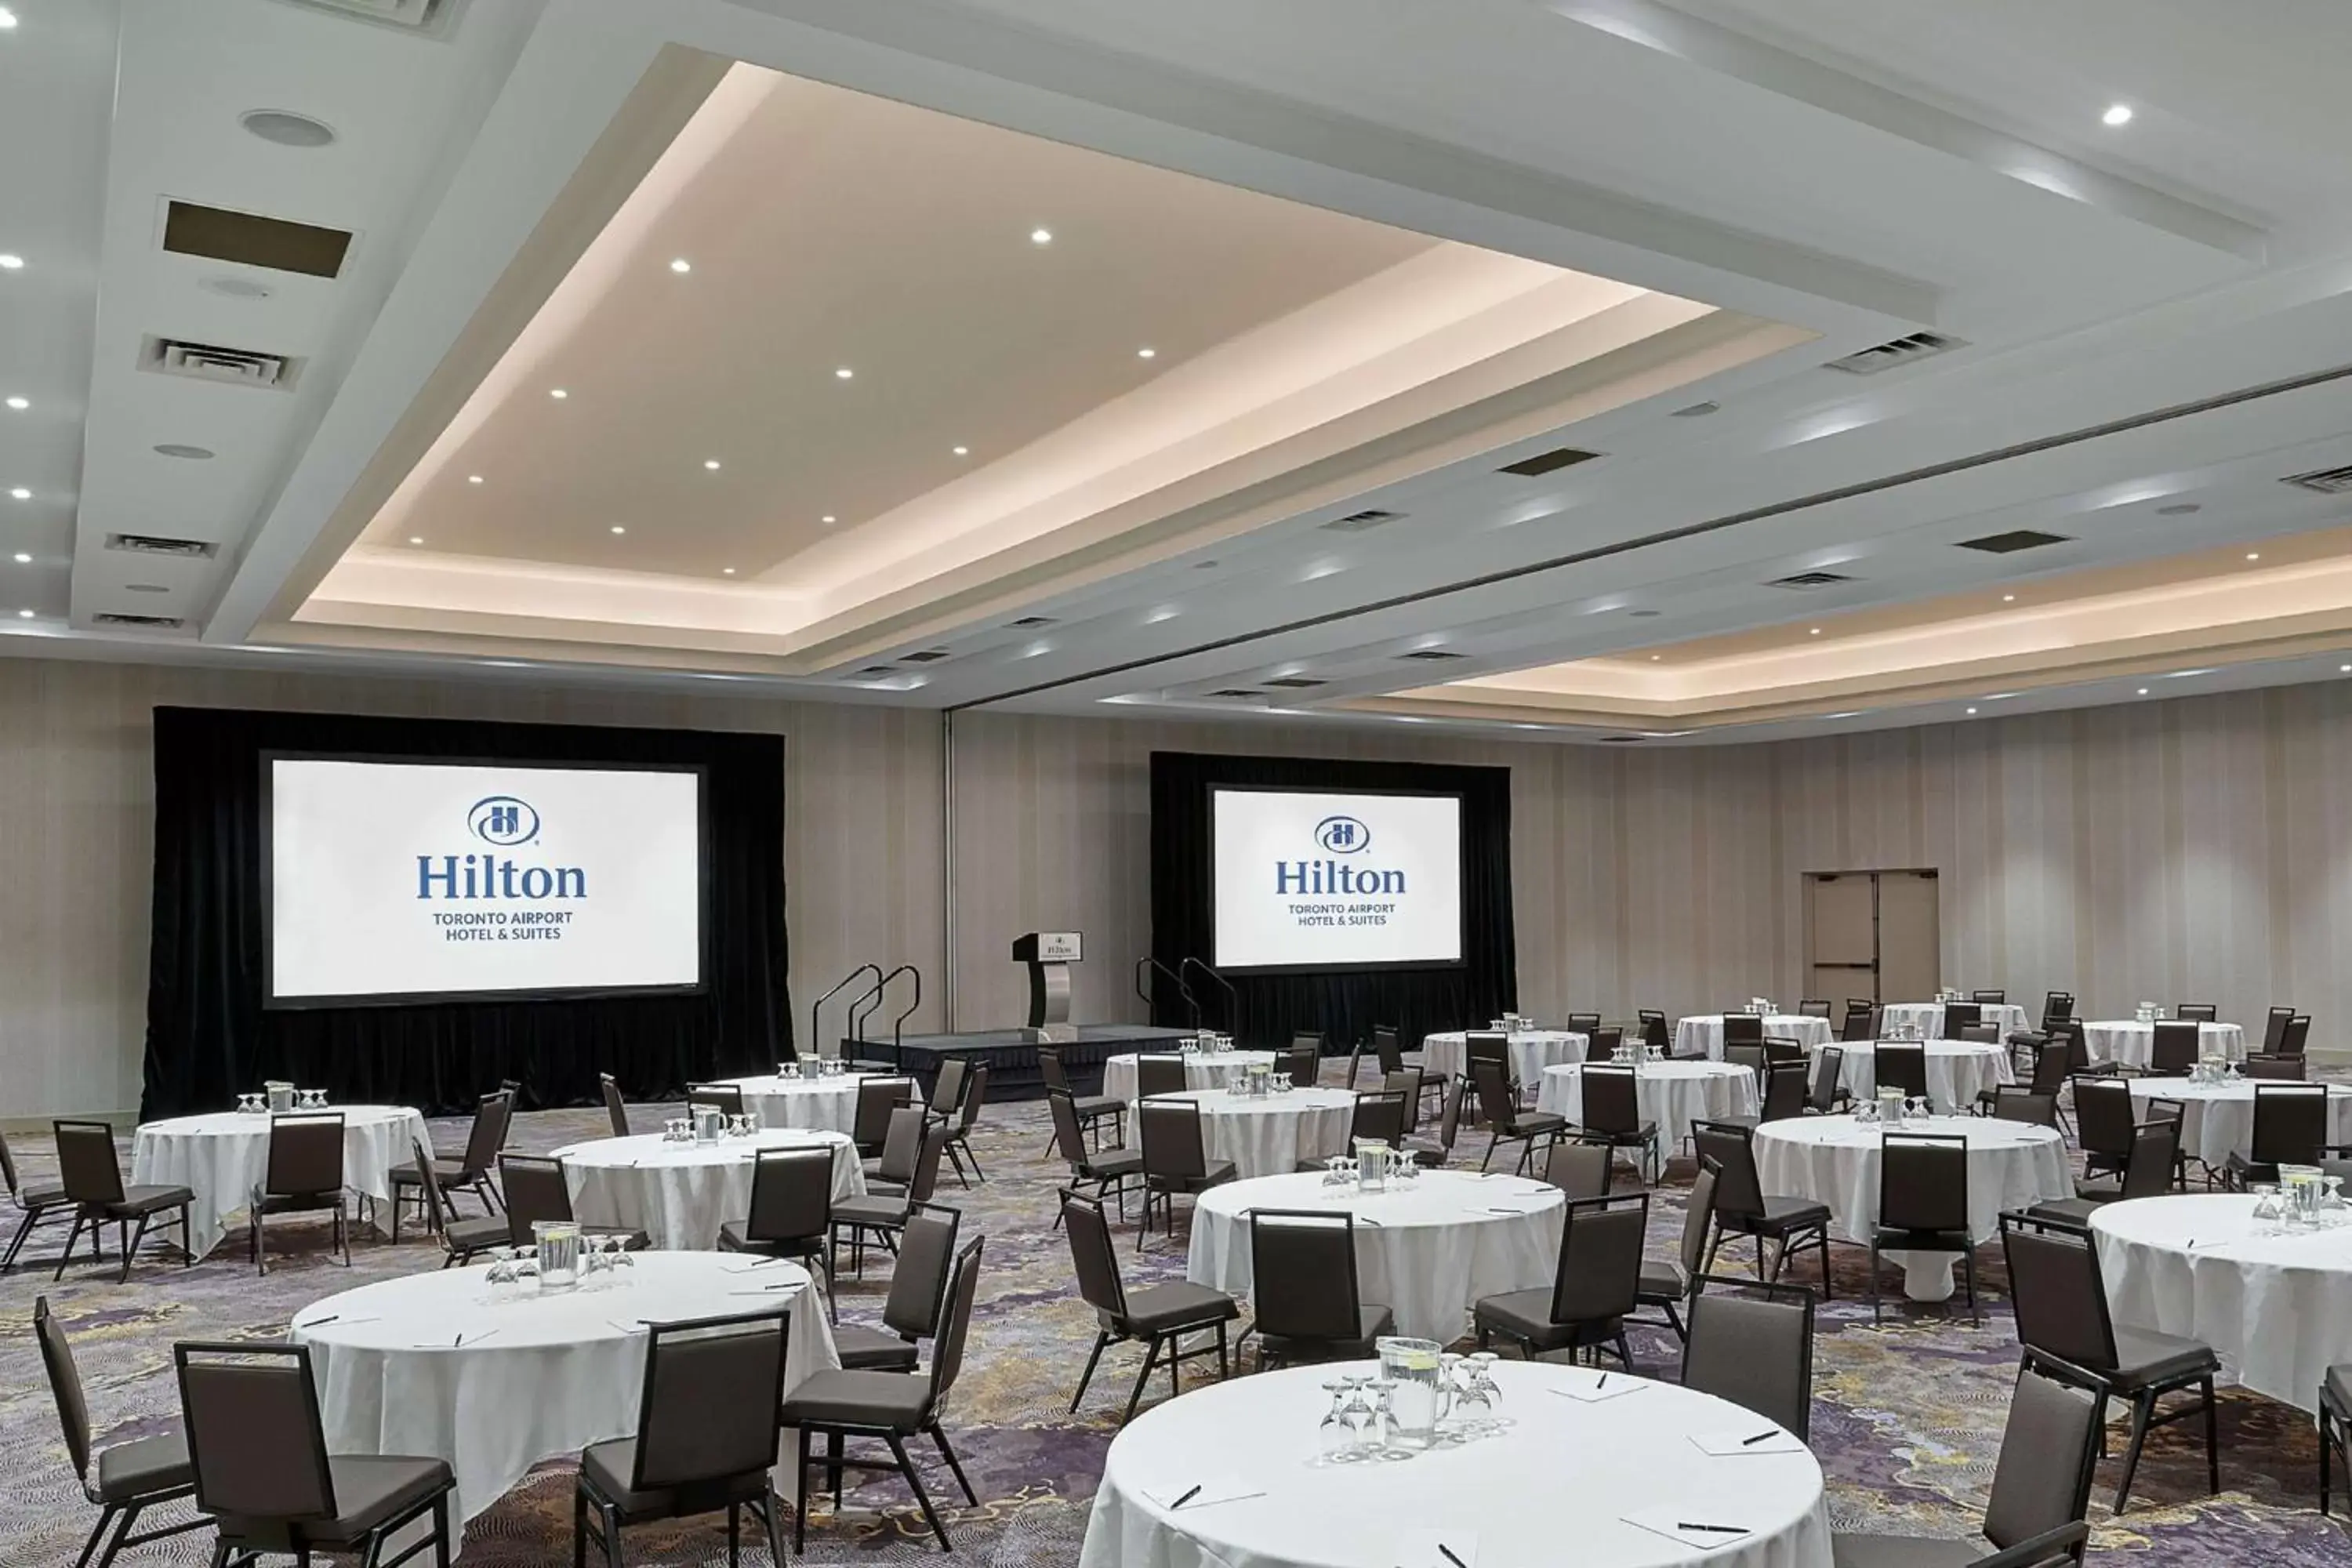 Meeting/conference room, Banquet Facilities in Hilton Toronto Airport Hotel & Suites